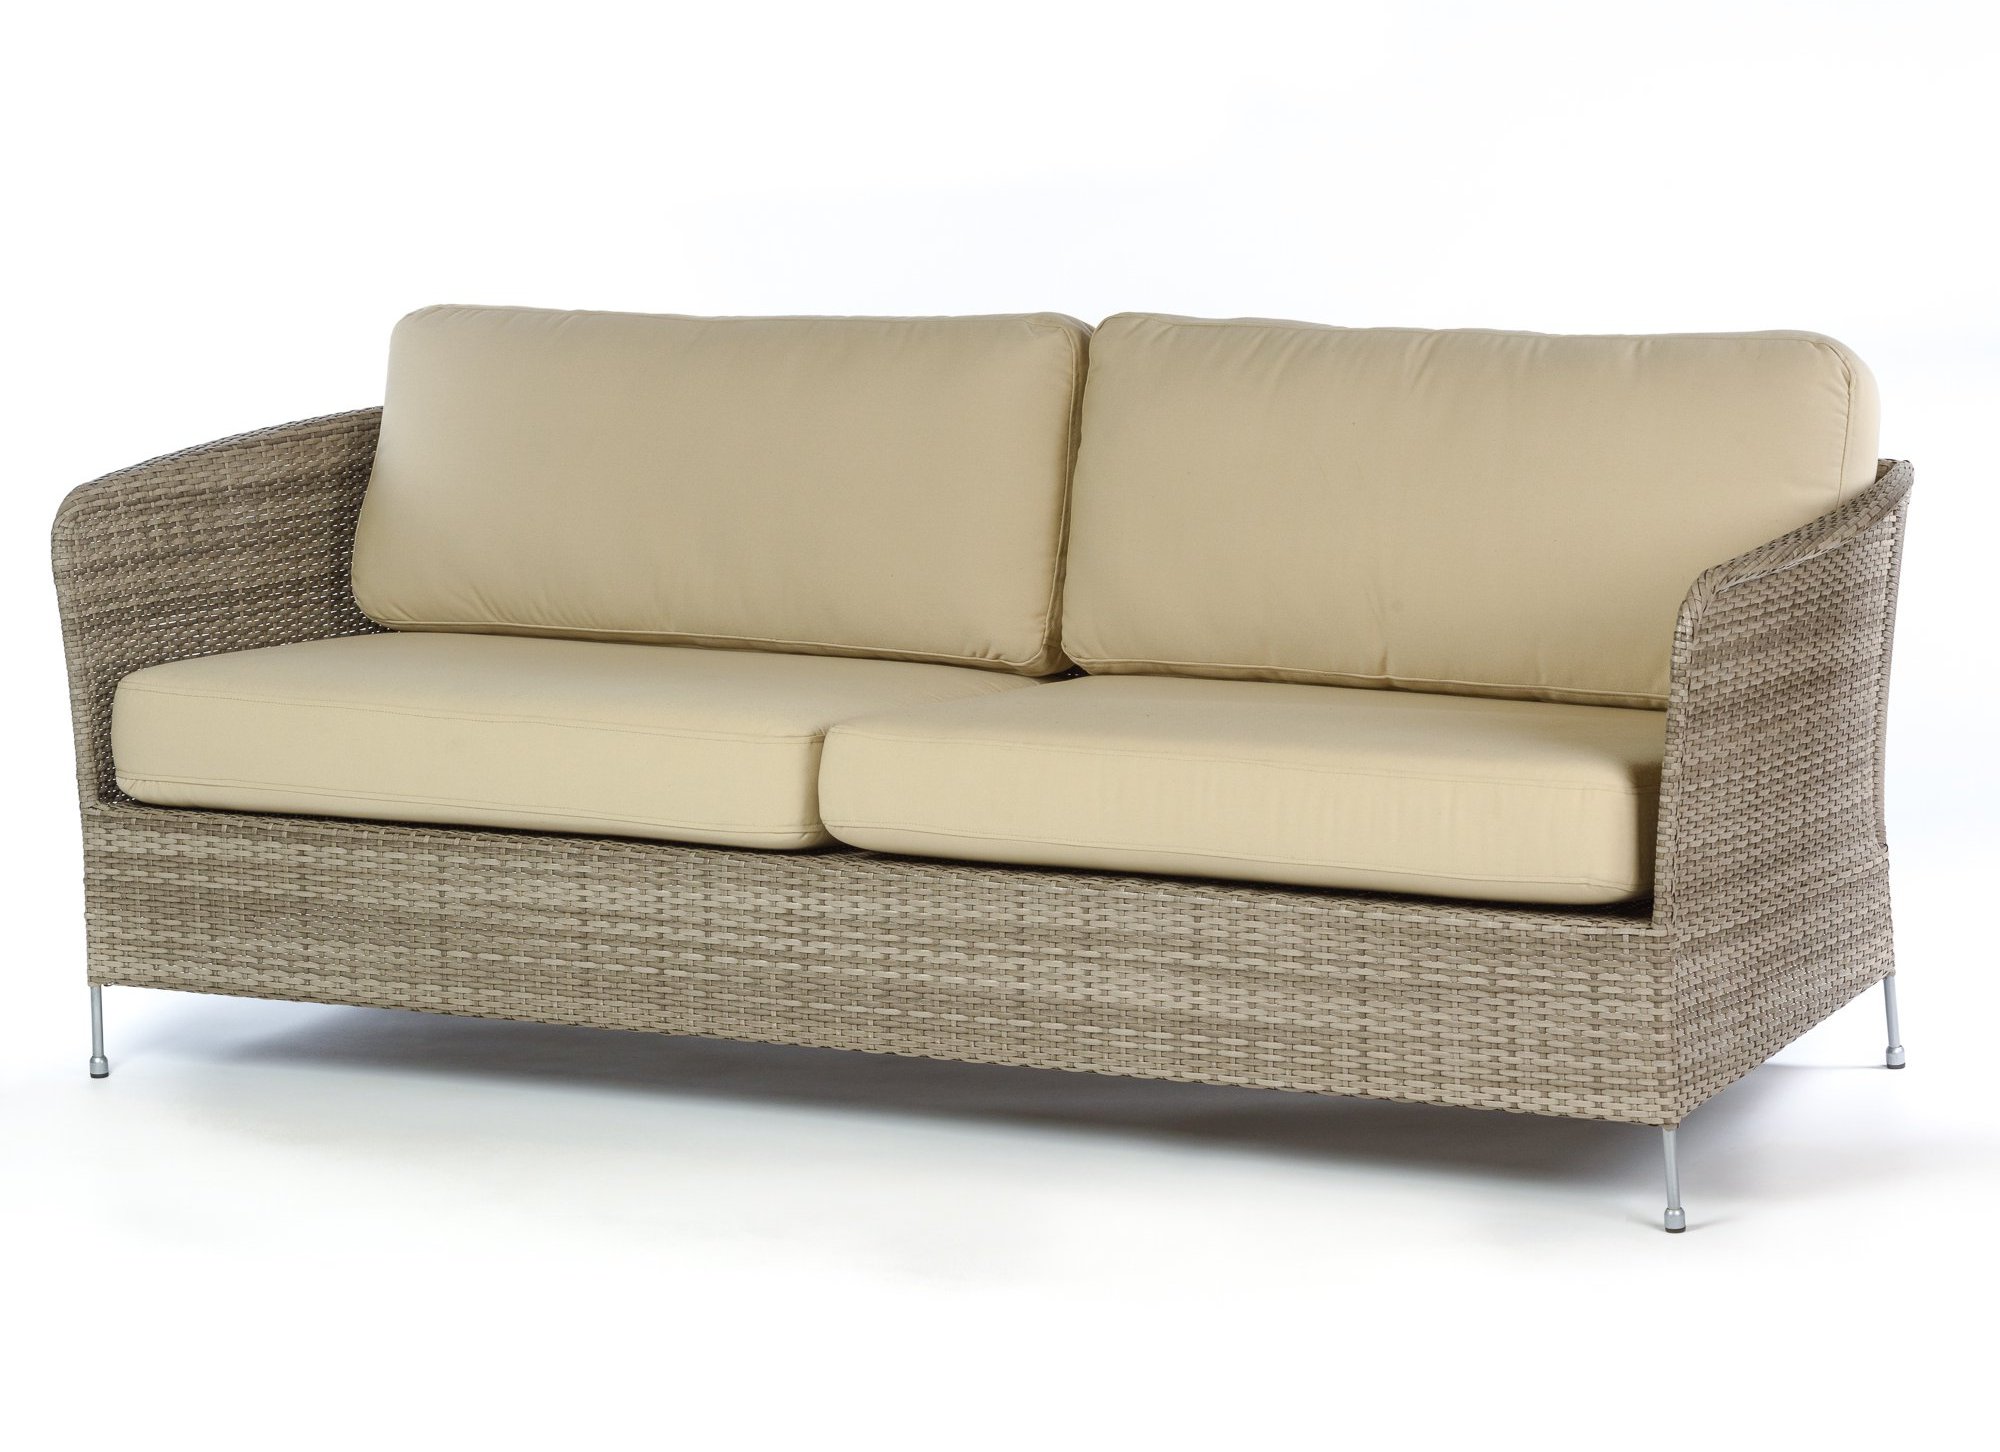 Deep Seating Replacement Cushions For Outdoor Furniture Wicker 